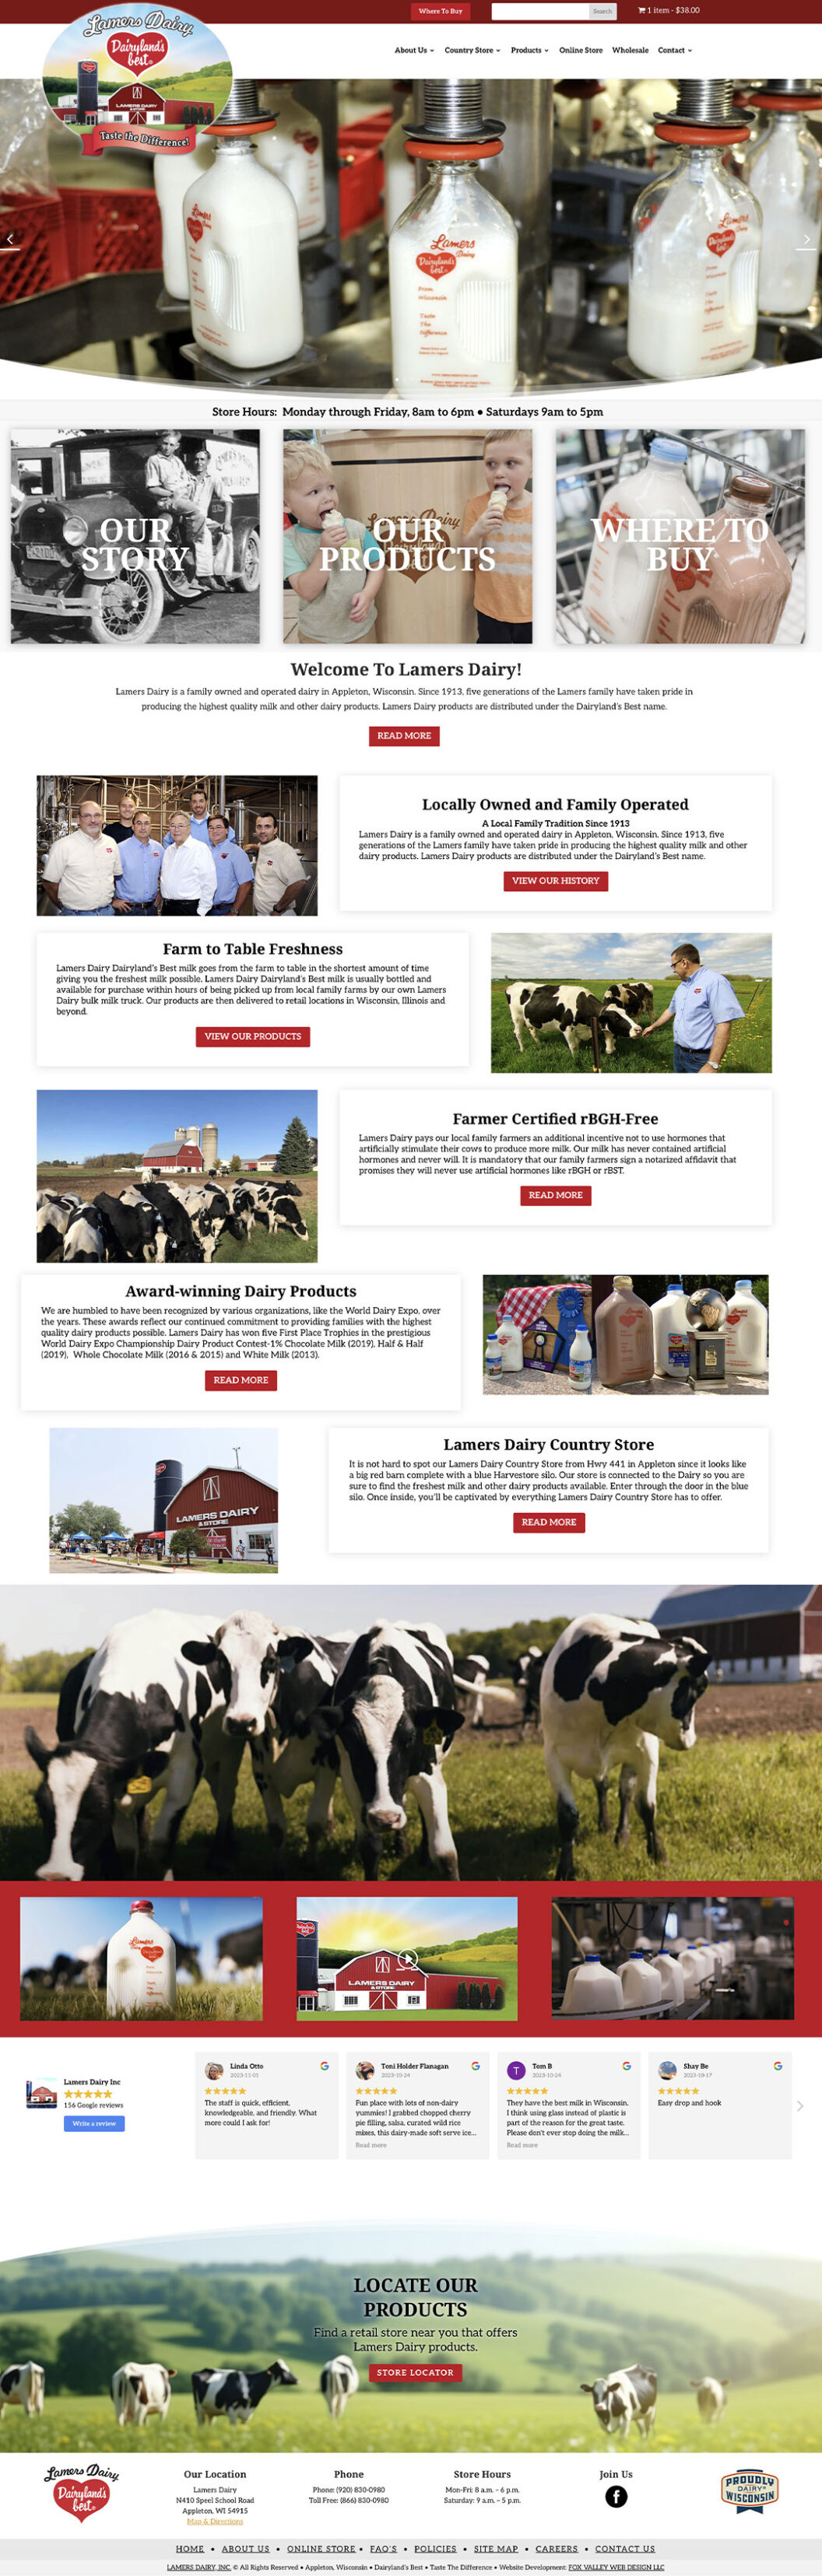 lamers dairy inc, dairylands best, appleton, wisconsin, family farms, fresh milk, dairy products, ecommerce store, taste the difference, store locator, fox valley web design, graphic design, custom wordpress websites, custom ecommerce websites, logo design, drone aerial photography, above wisconsin, final cut pro, video production, packerland, fox valley wi